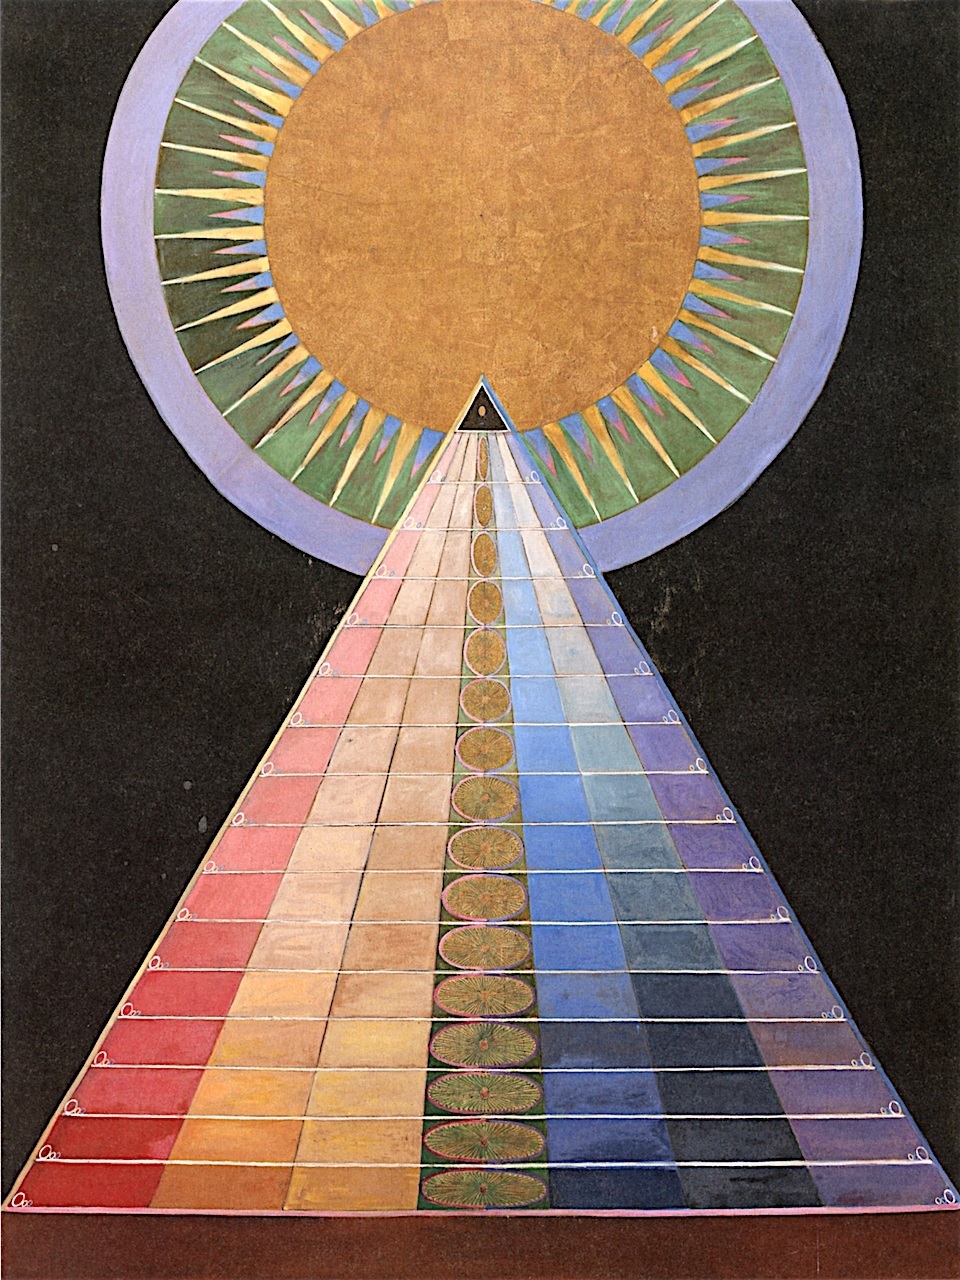 Painting of a pyramid of different pastel colored squares intersections with a circle featuring a sun like creation